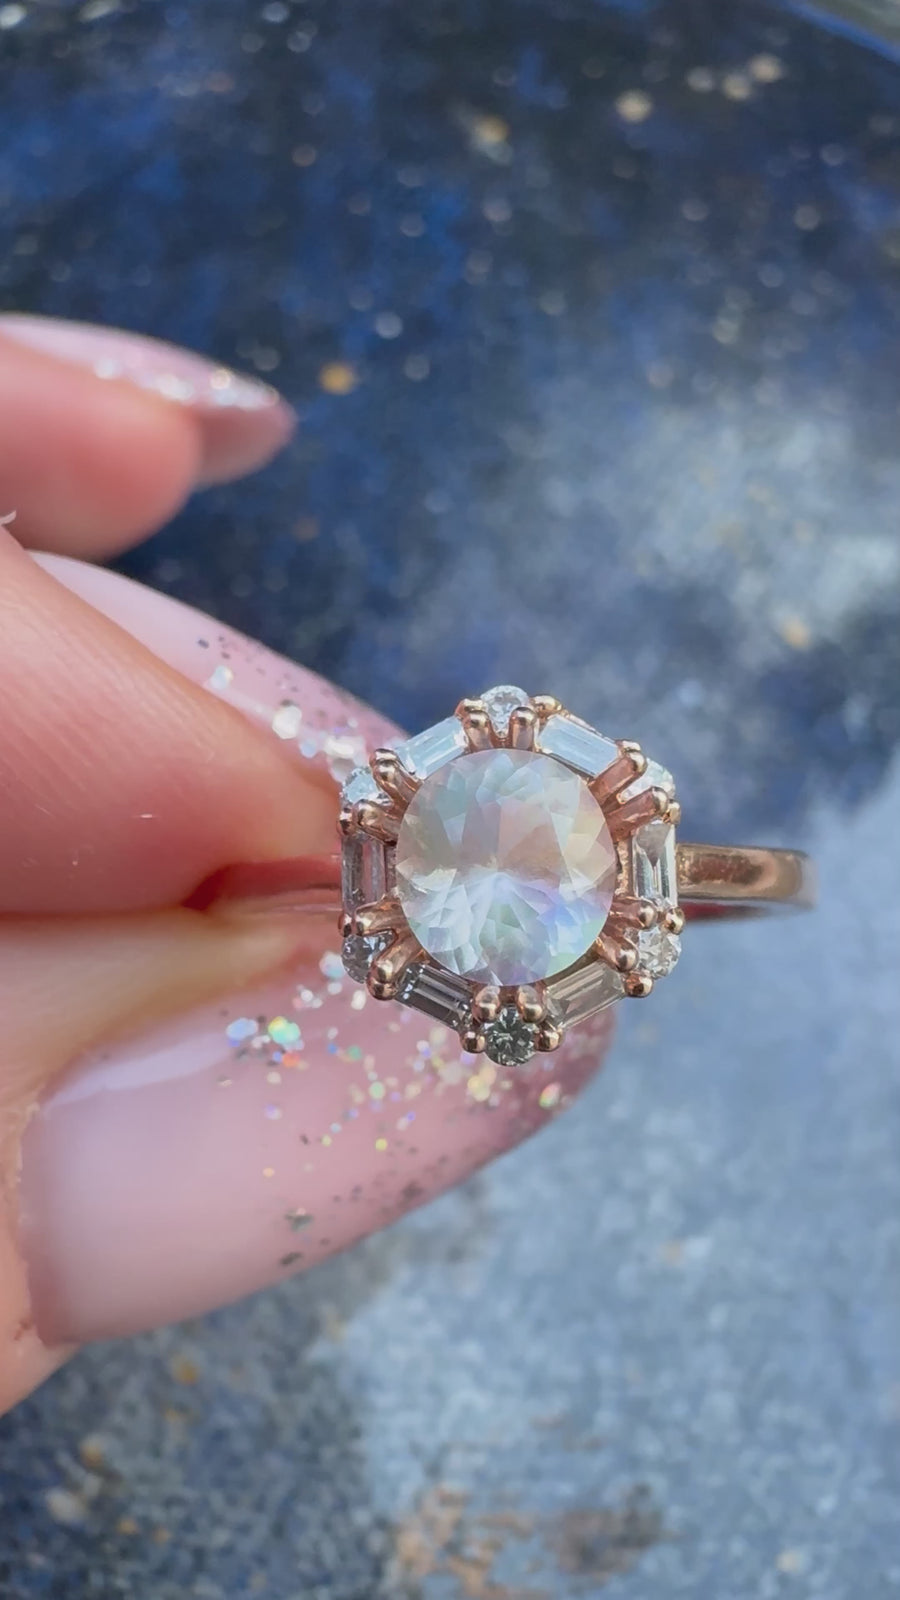 20% OFF / One of a Kind / Rainbow Moonstone Diamond Halo Baguette Ring